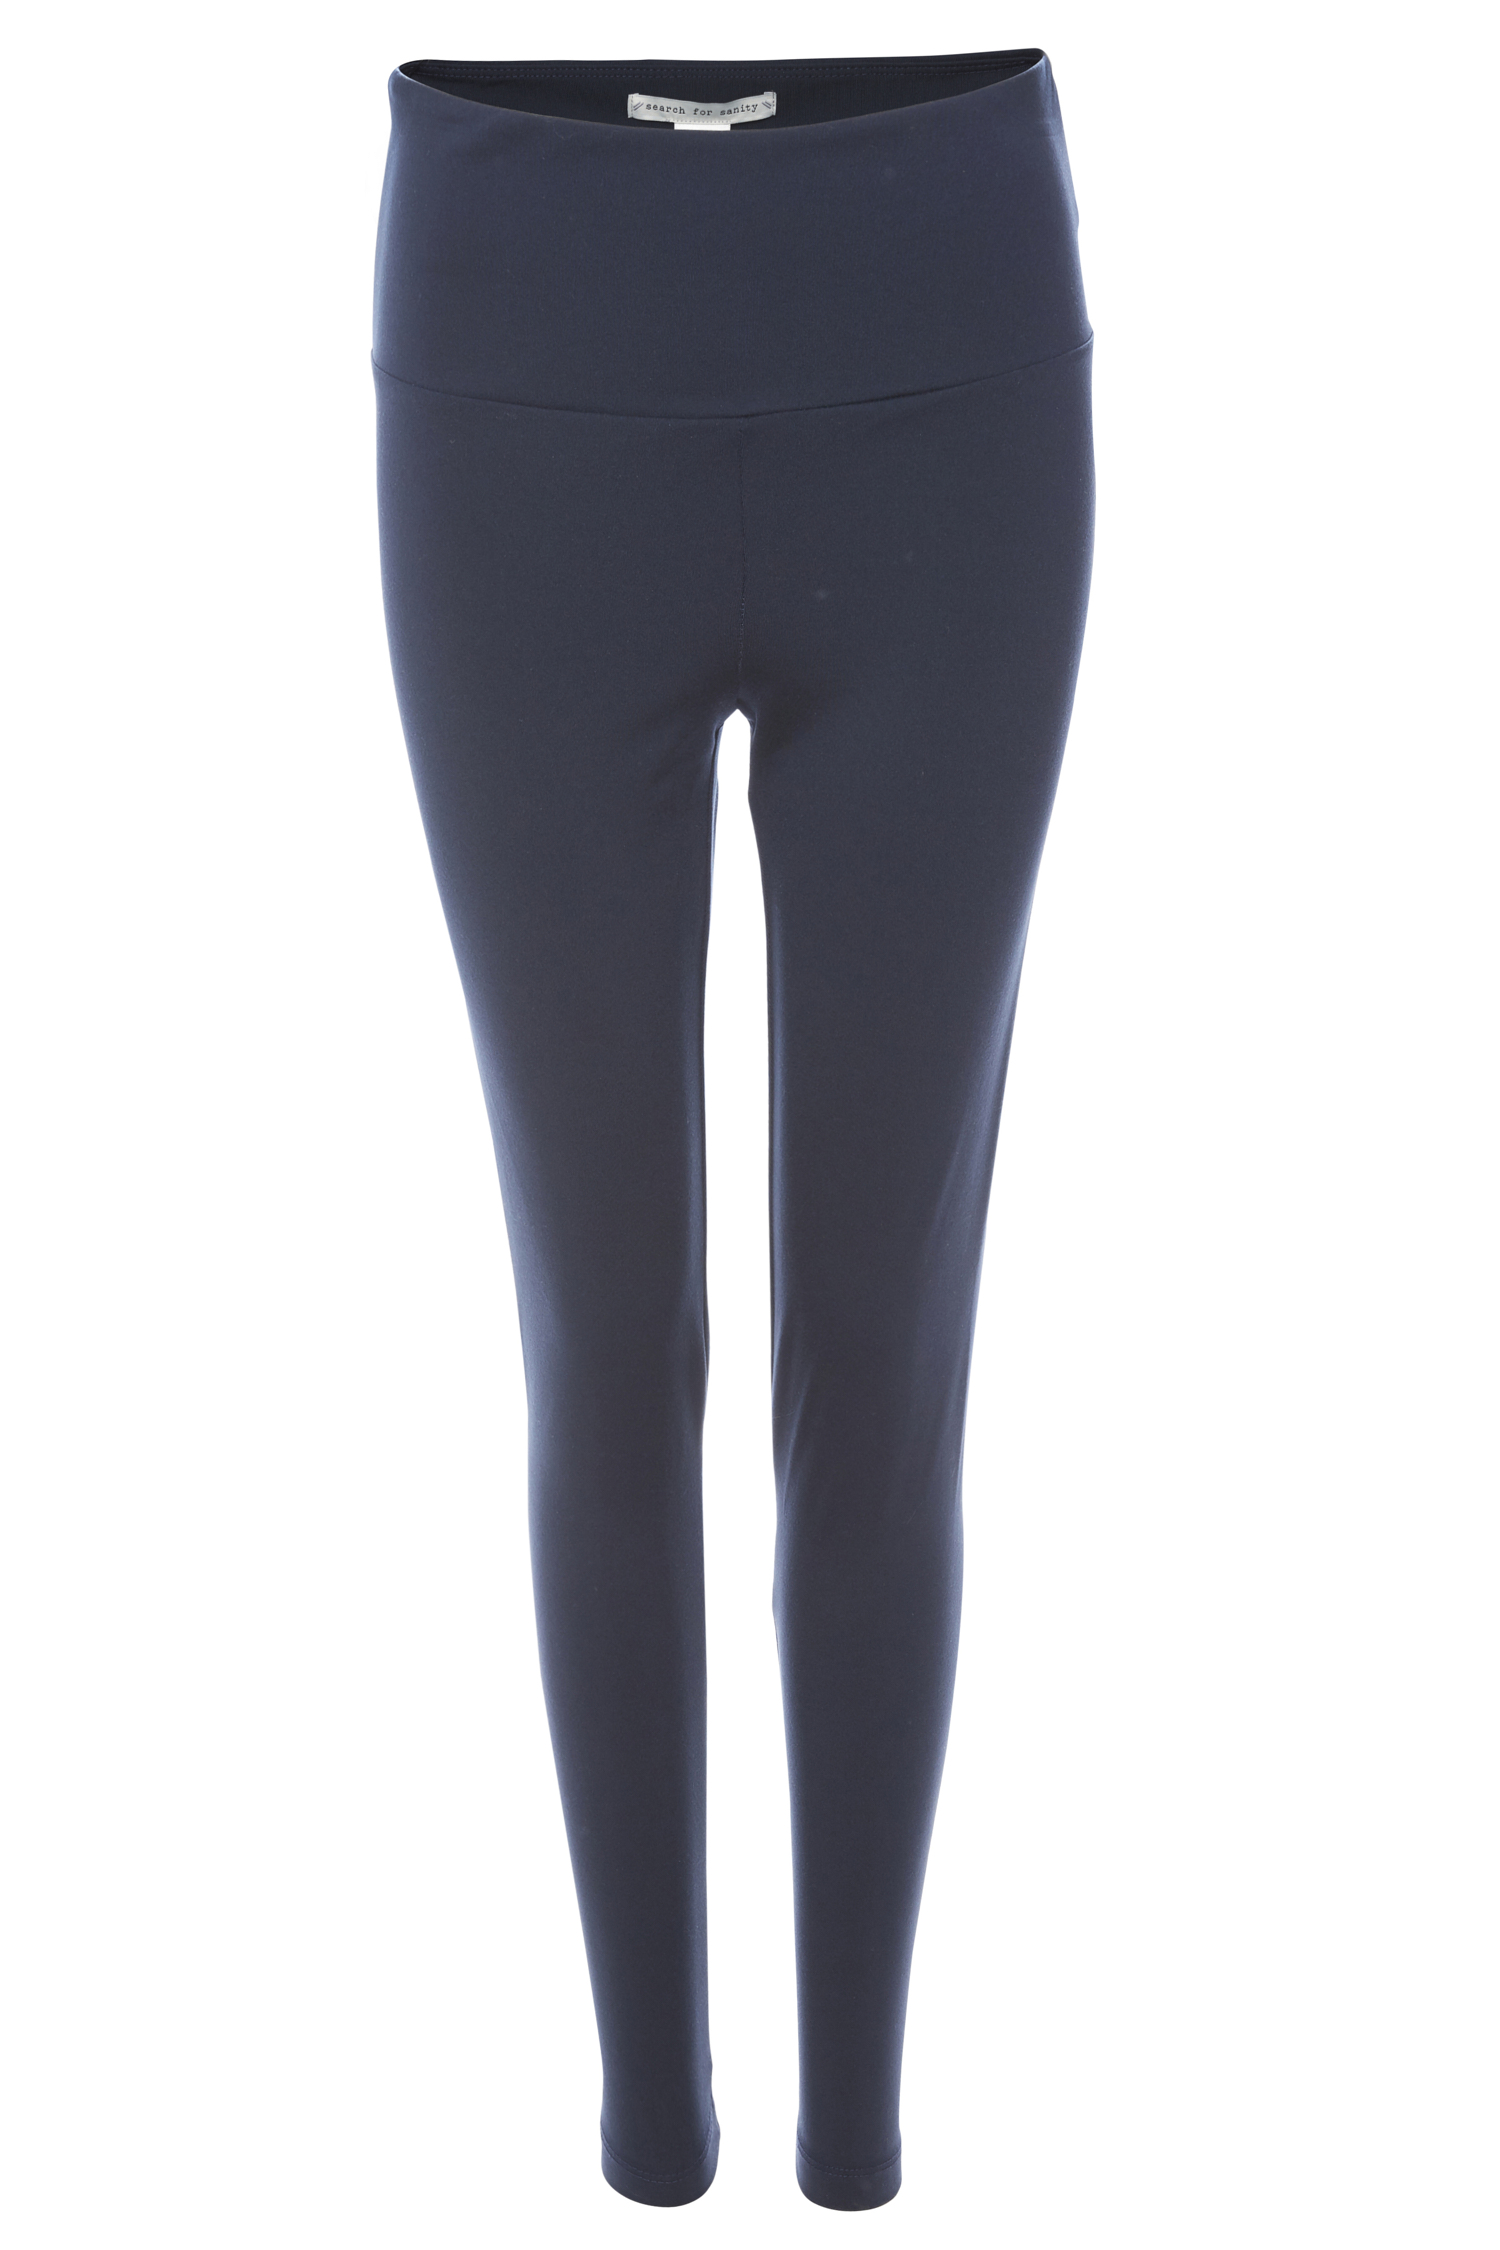 Search for Sanity Wide Waistband Legging